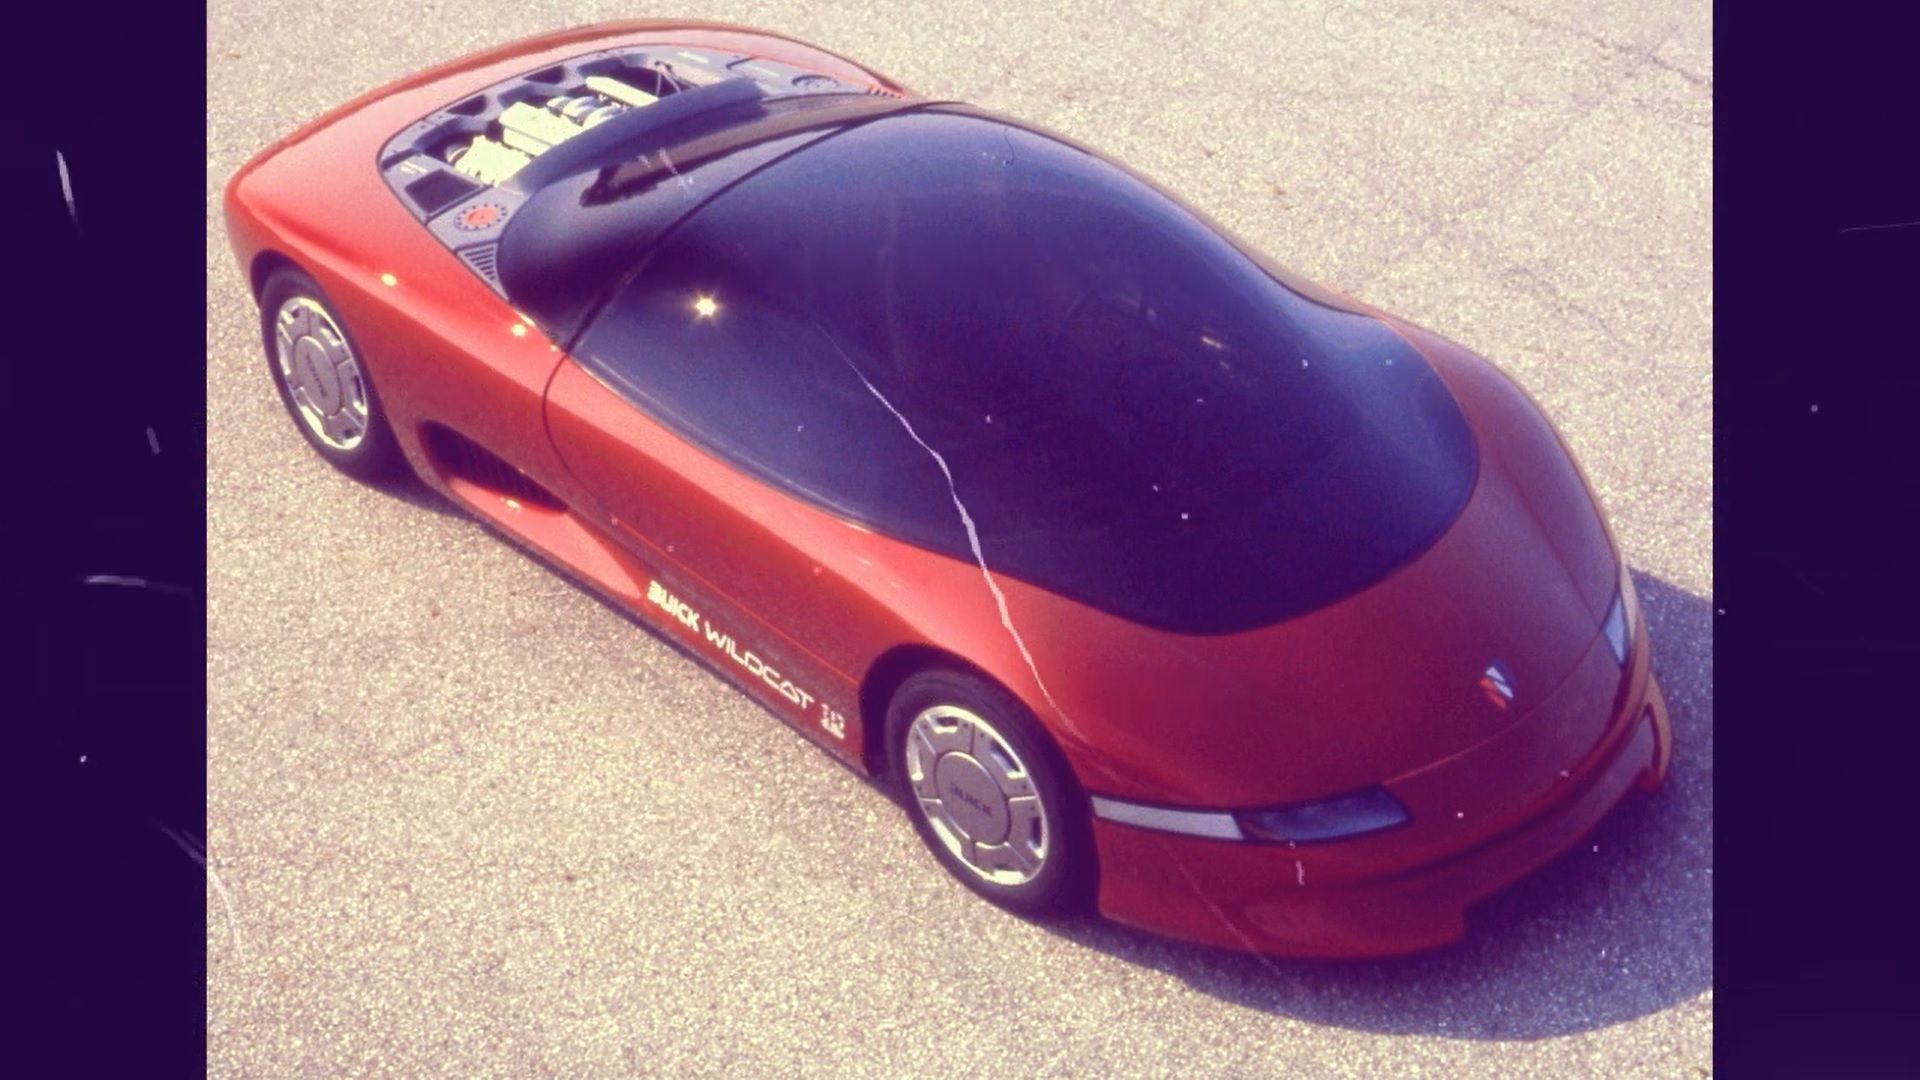 1985 Buick Wildcat Concept - The Car You've Definitely Forgotten About 